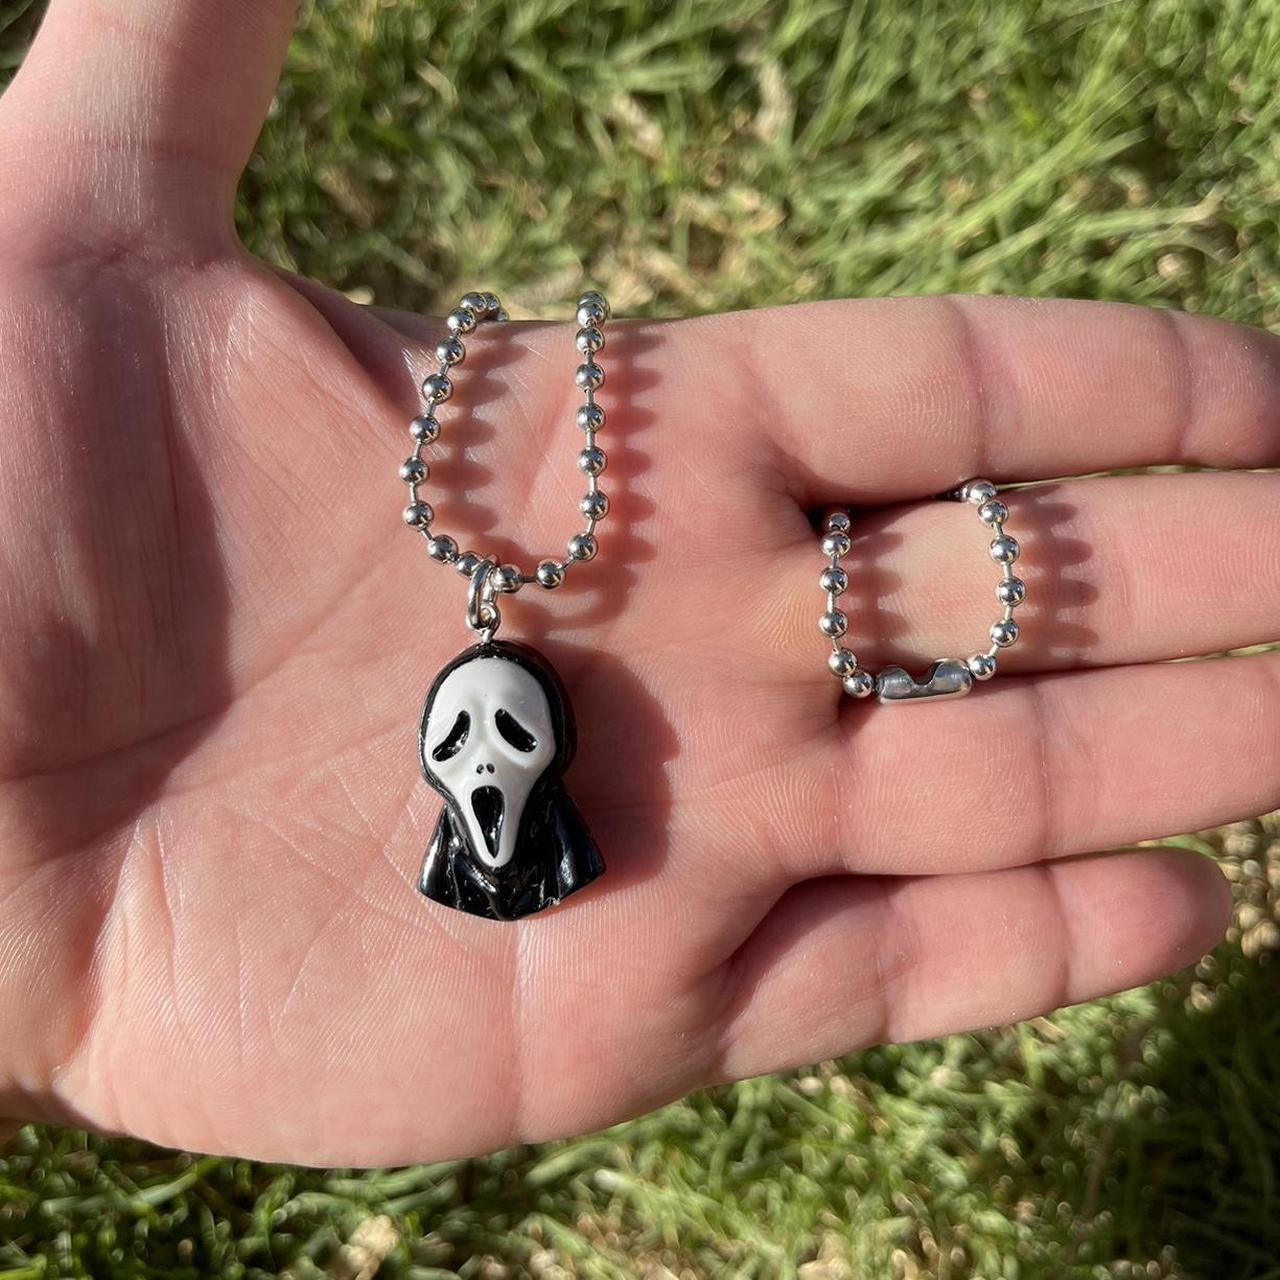 Ghost face necklace | Face necklace, Silver jewelry, Ghost faces